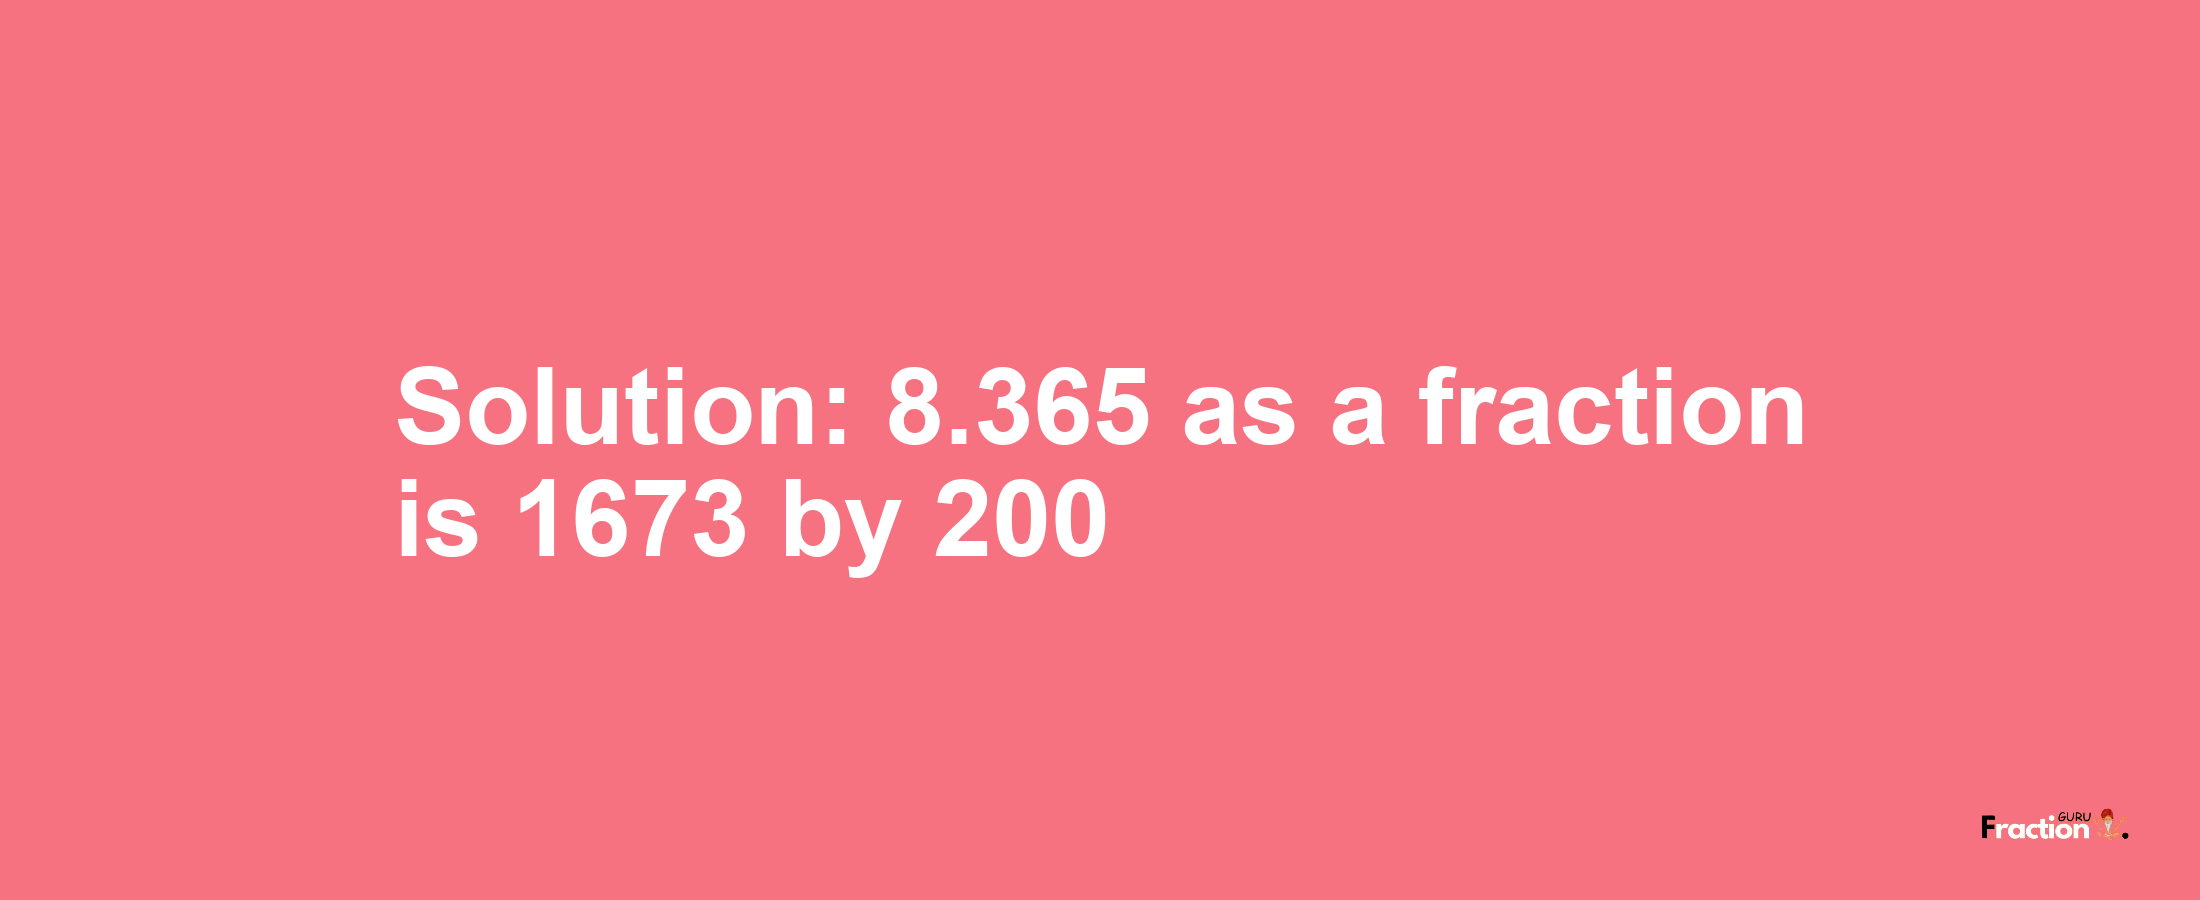 Solution:8.365 as a fraction is 1673/200